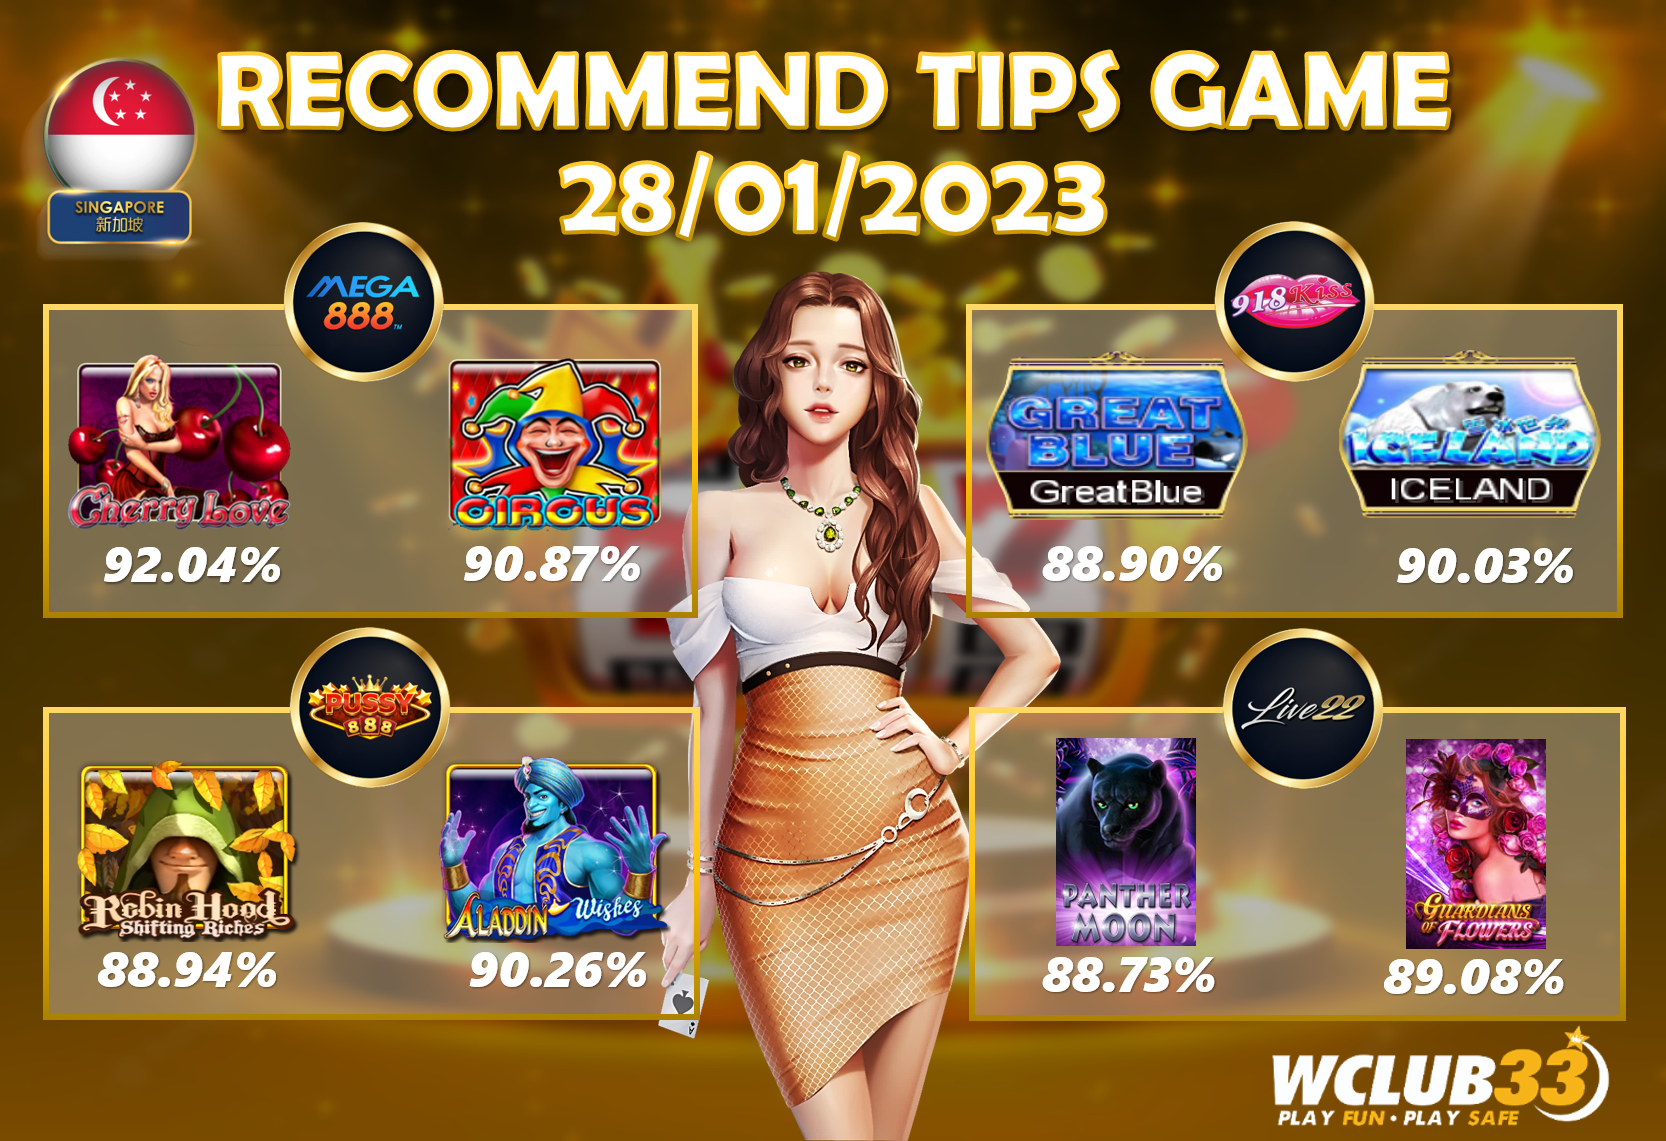 UPDATE TIPS GAME 28/01